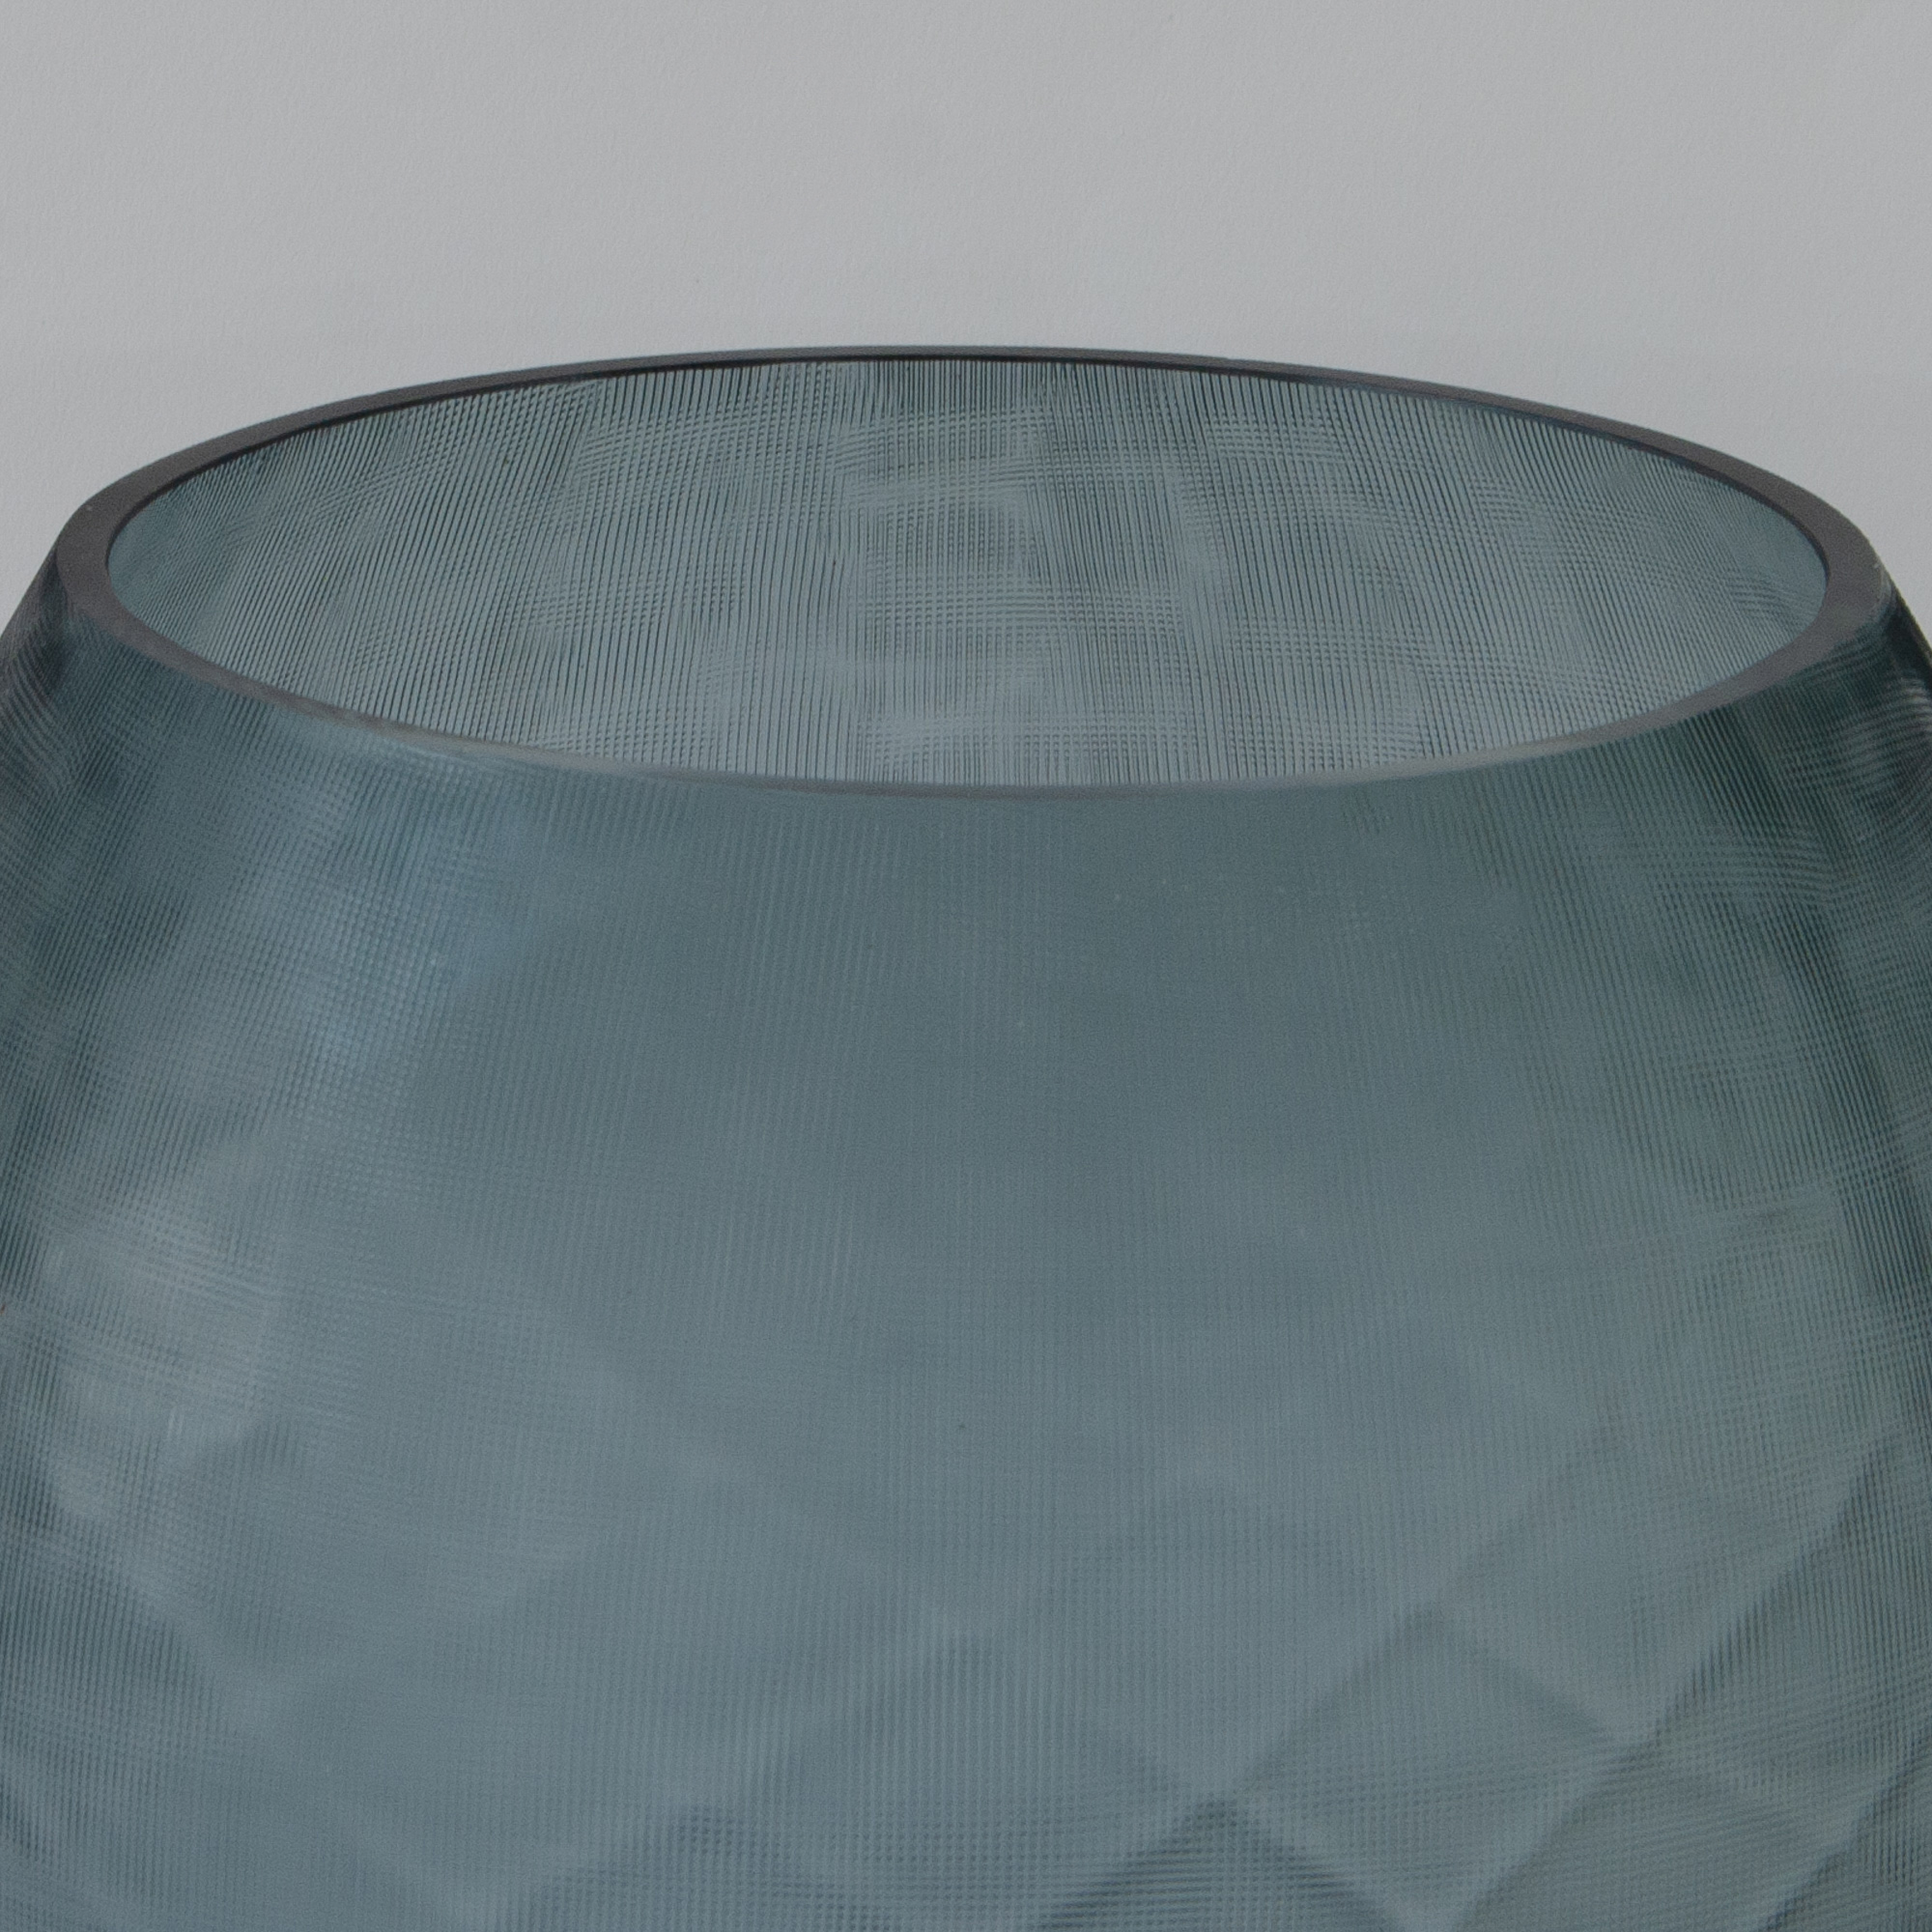 Mosaic Glass Candle Holder - Teal